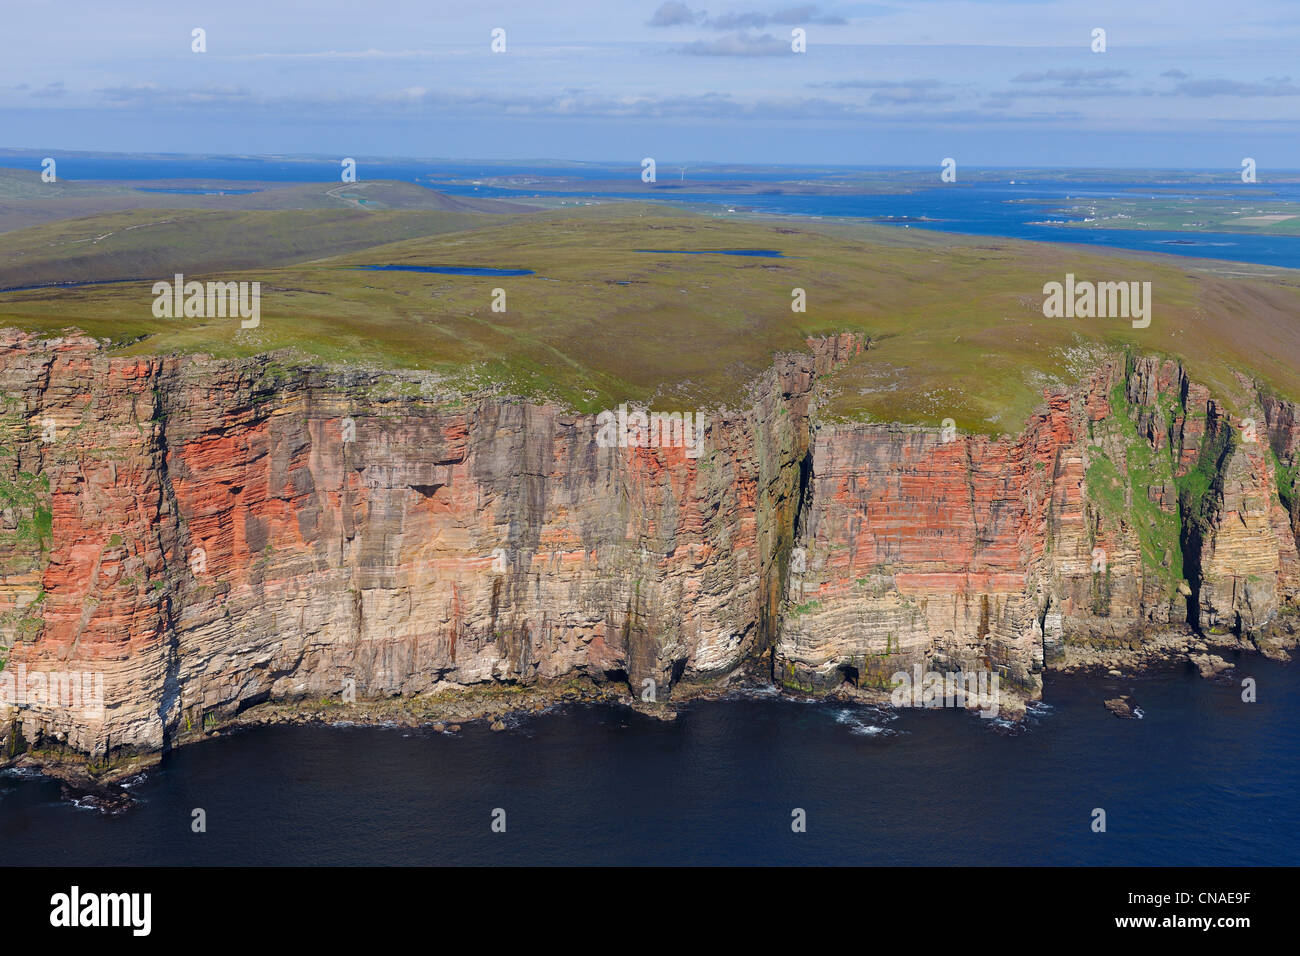 United Kingdom, Scotland, Orkney Islands, cliffs of the Island of Hoy on the Atlantic coast south of Rackwick and Scapa Flow Stock Photo